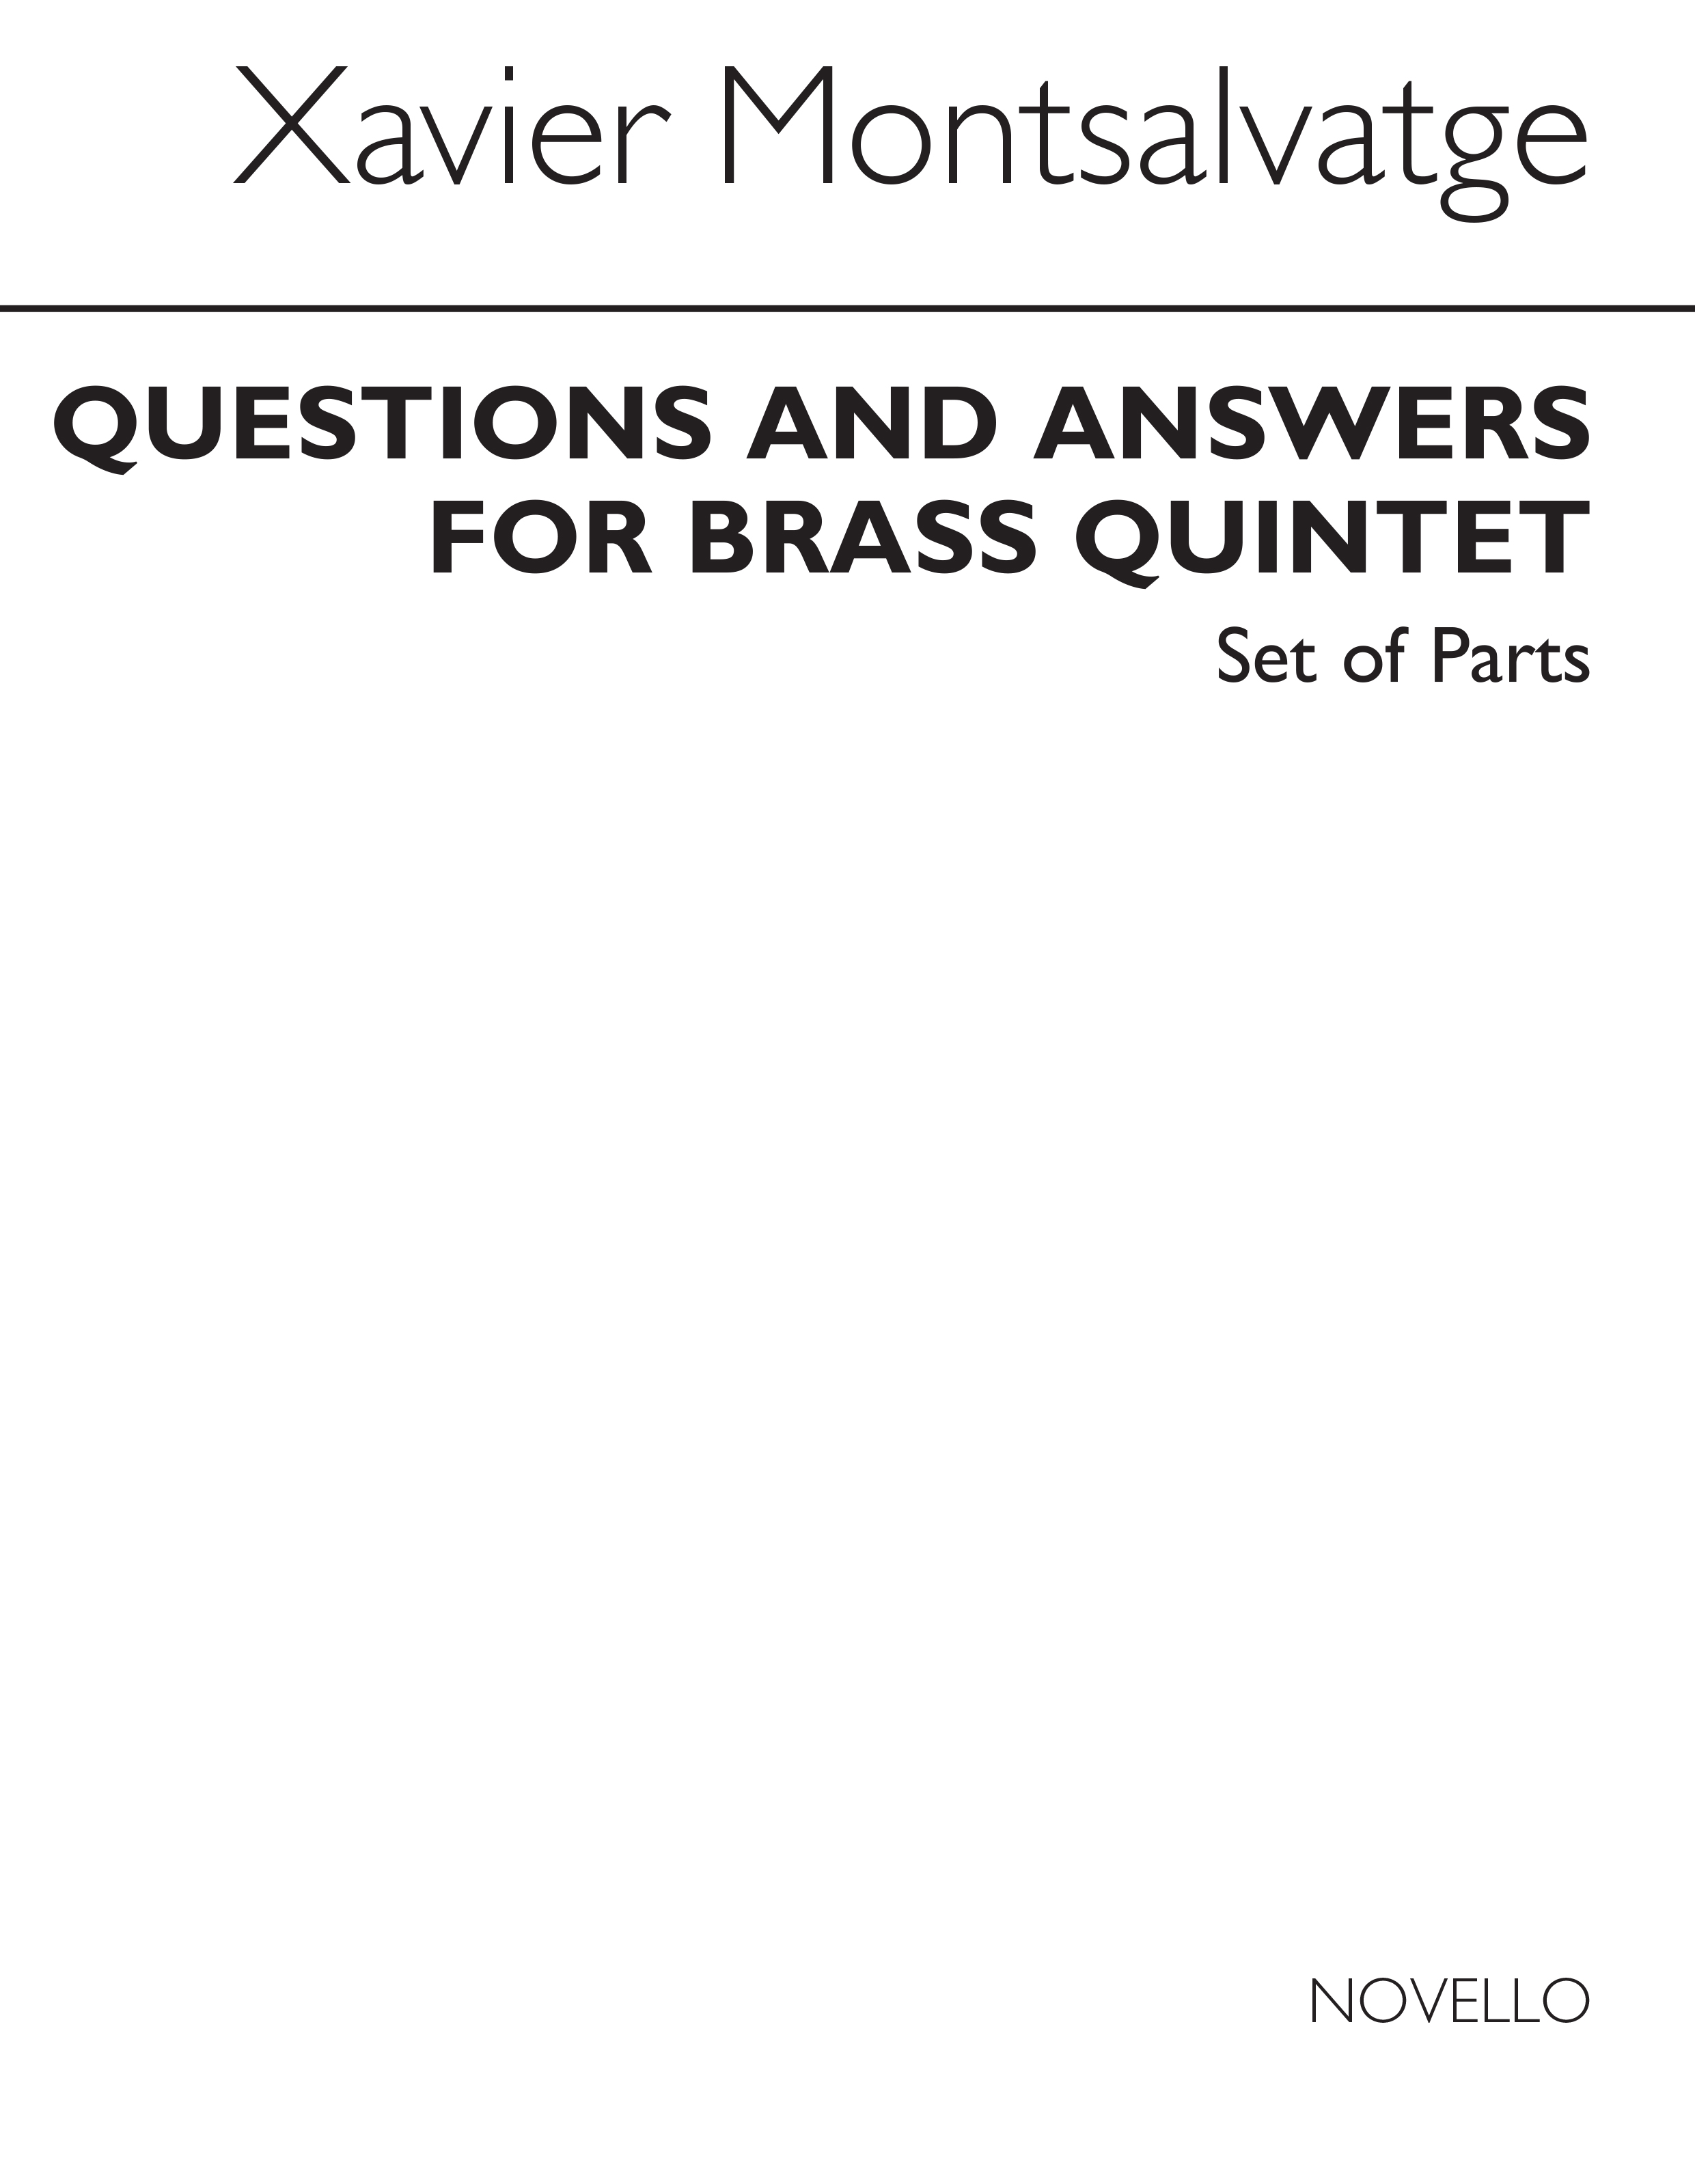 Montsalvatge: Questions & Answers for Brass Quintet (Parts)